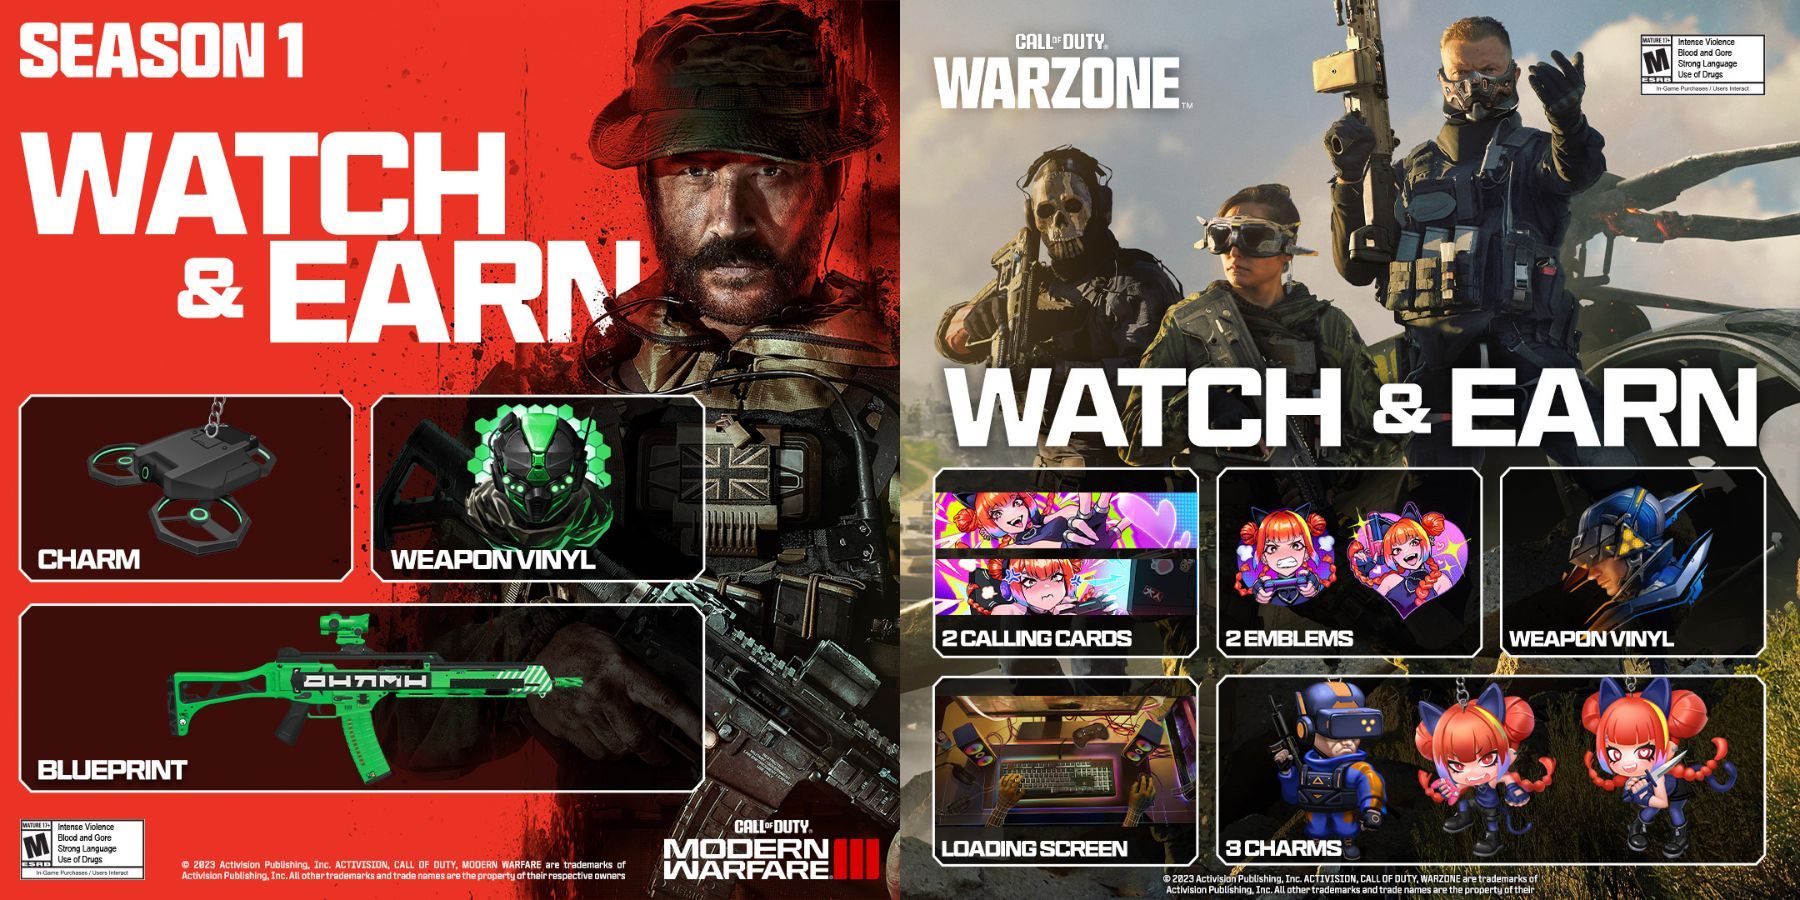 How to get Warzone 2 Twitch drops